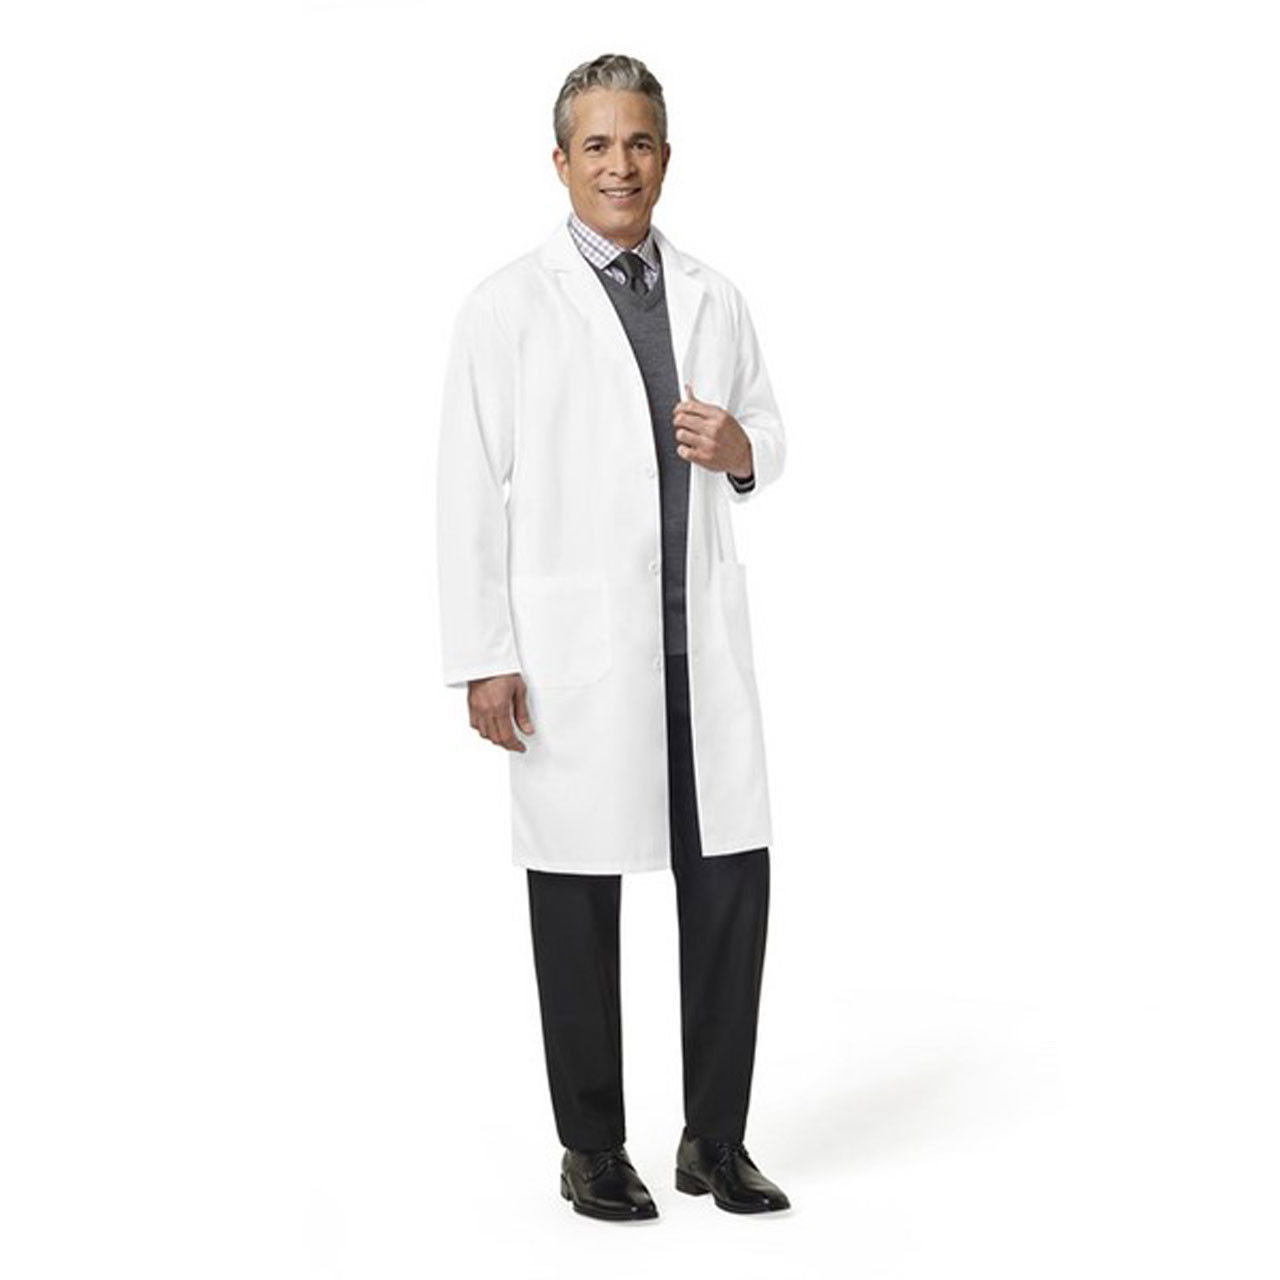 What is the length of the cotton lab coat I am about to purchase?